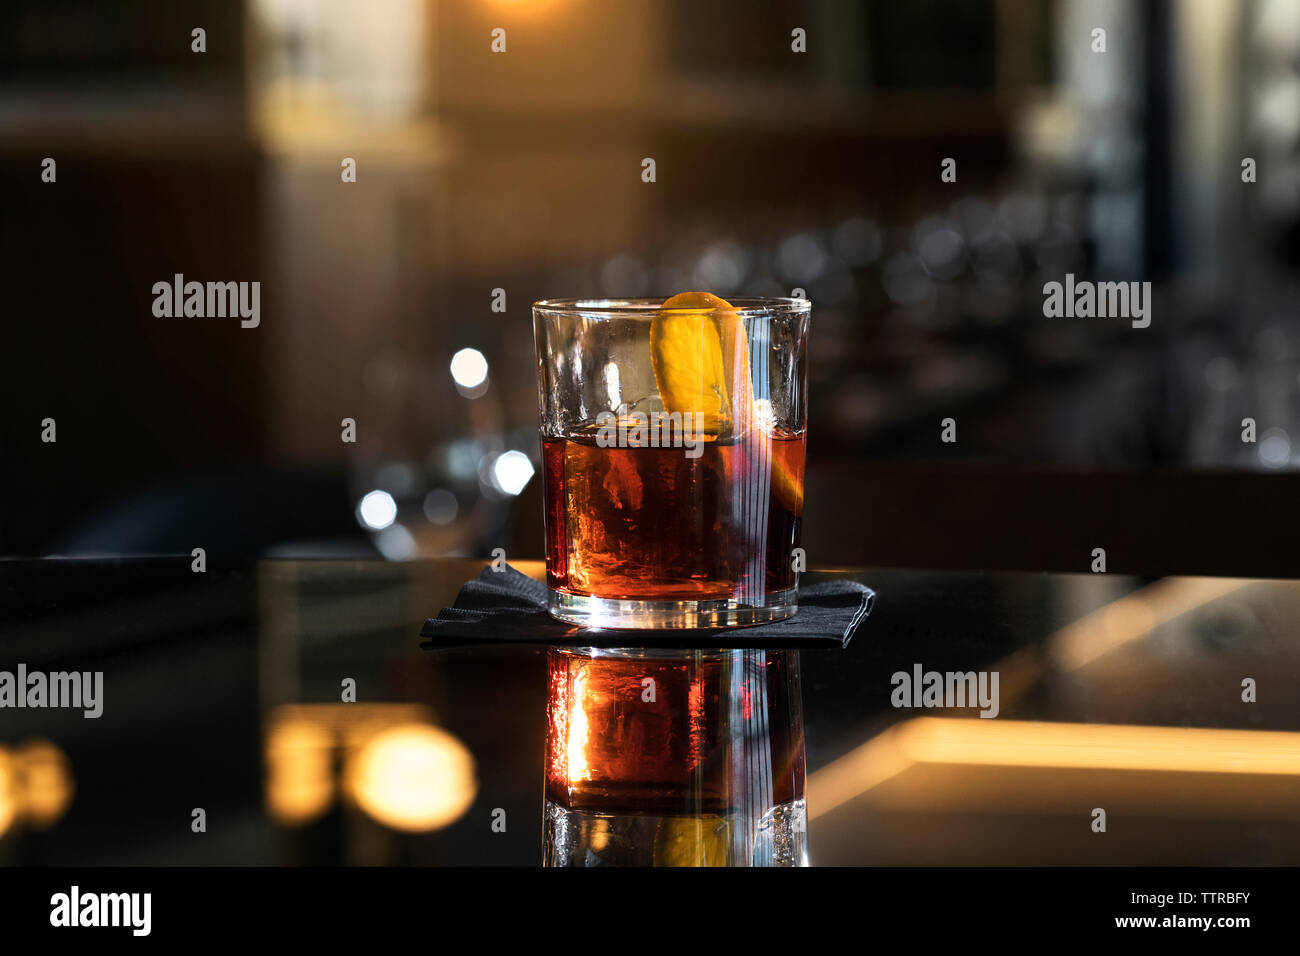 Alcohol in drinking glass at bar Stock Photo